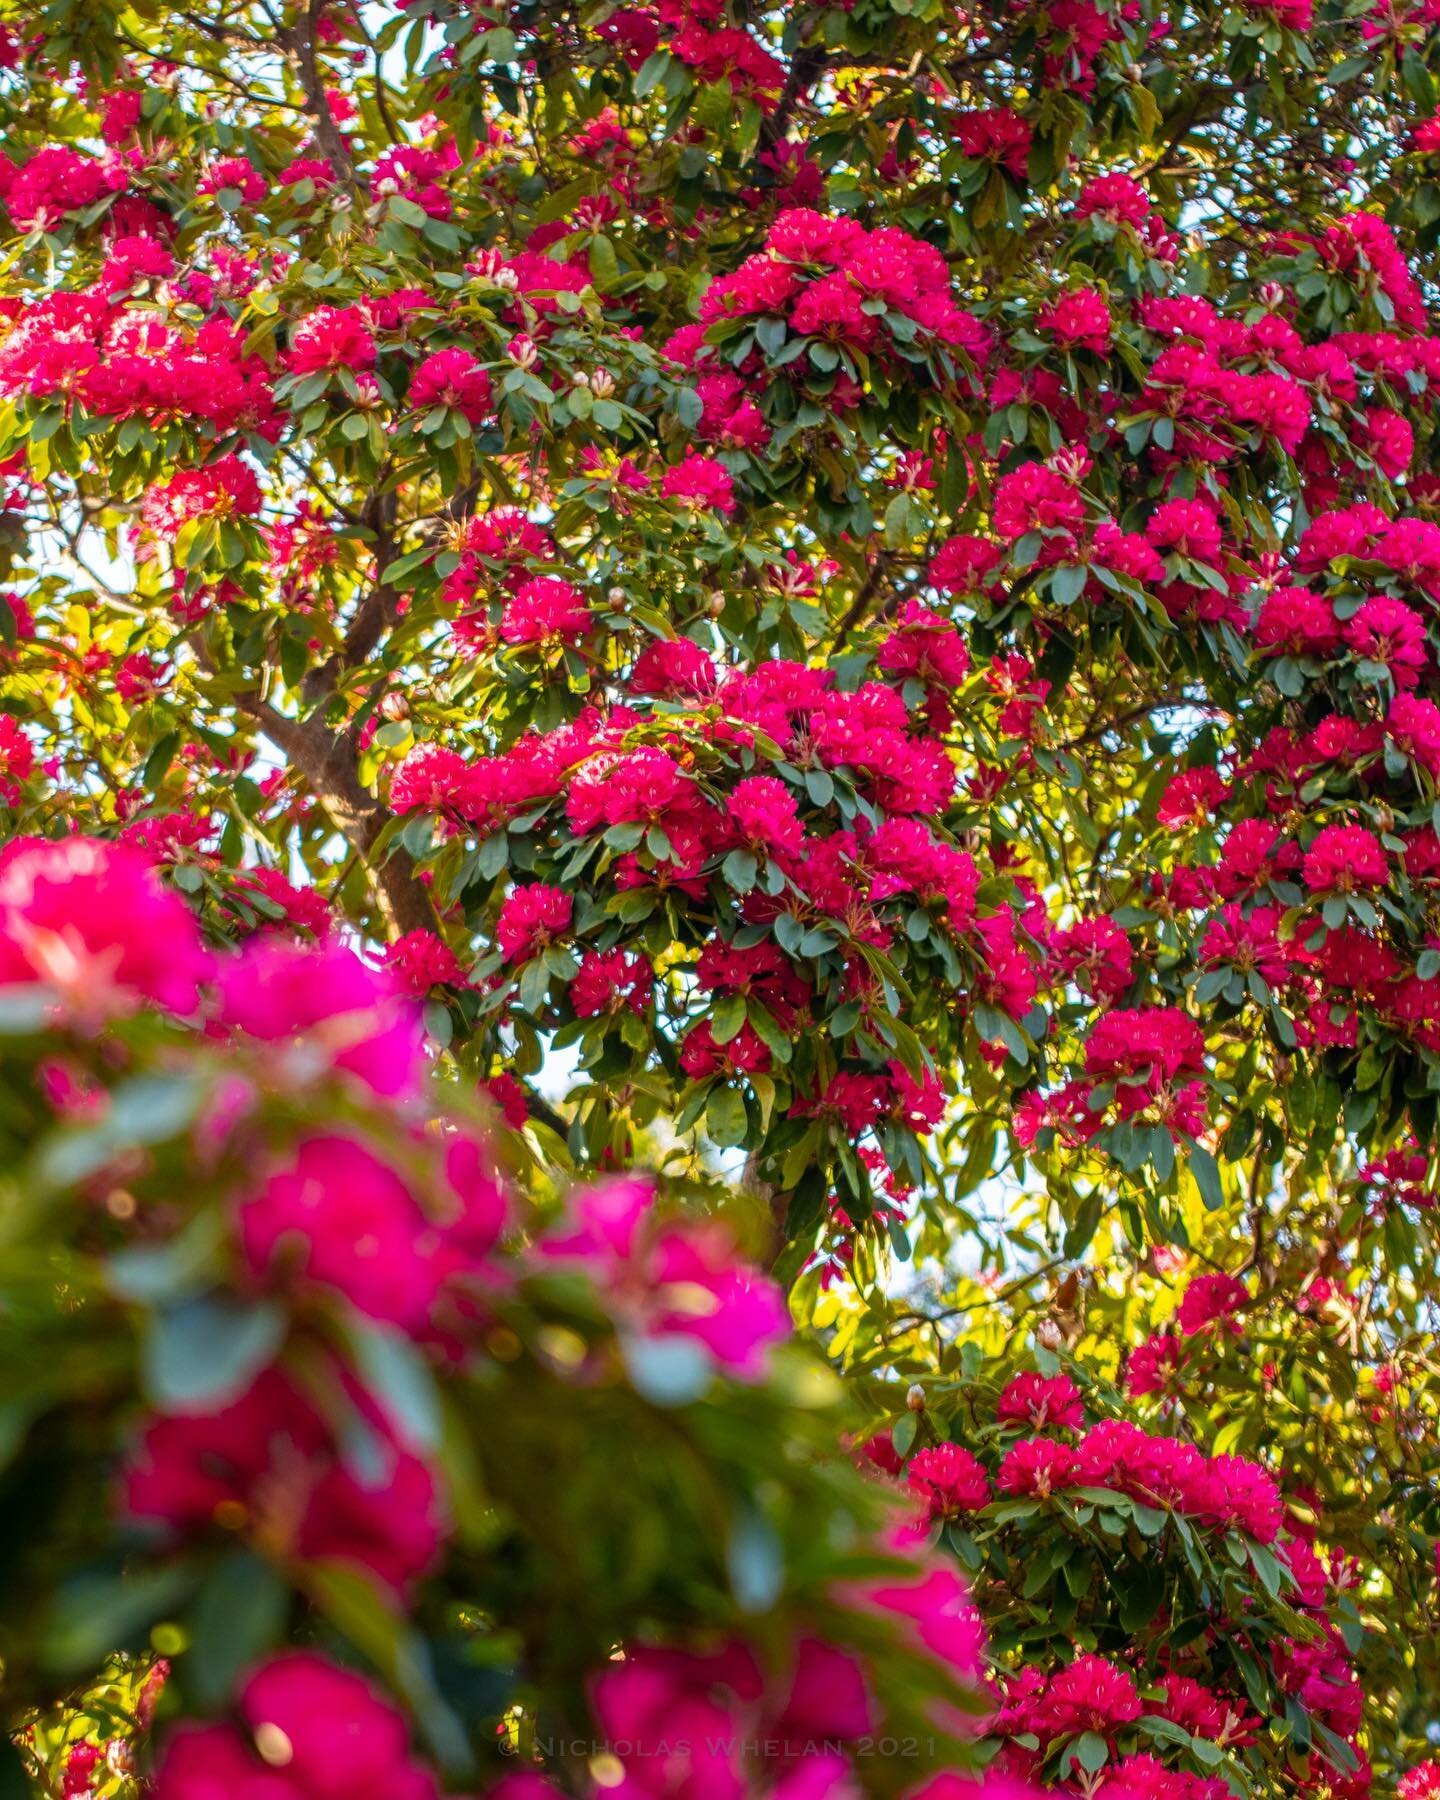 The magnificent rhododendron display currently in bloom at Kilmacurragh Botanical Gardens in Wicklow. Some of these giant flowering trees, imported from Nepal in the 1840s, are over 180 years old! #kilmacurraghgardens #kilmacurragh #kilmacurraghbotan